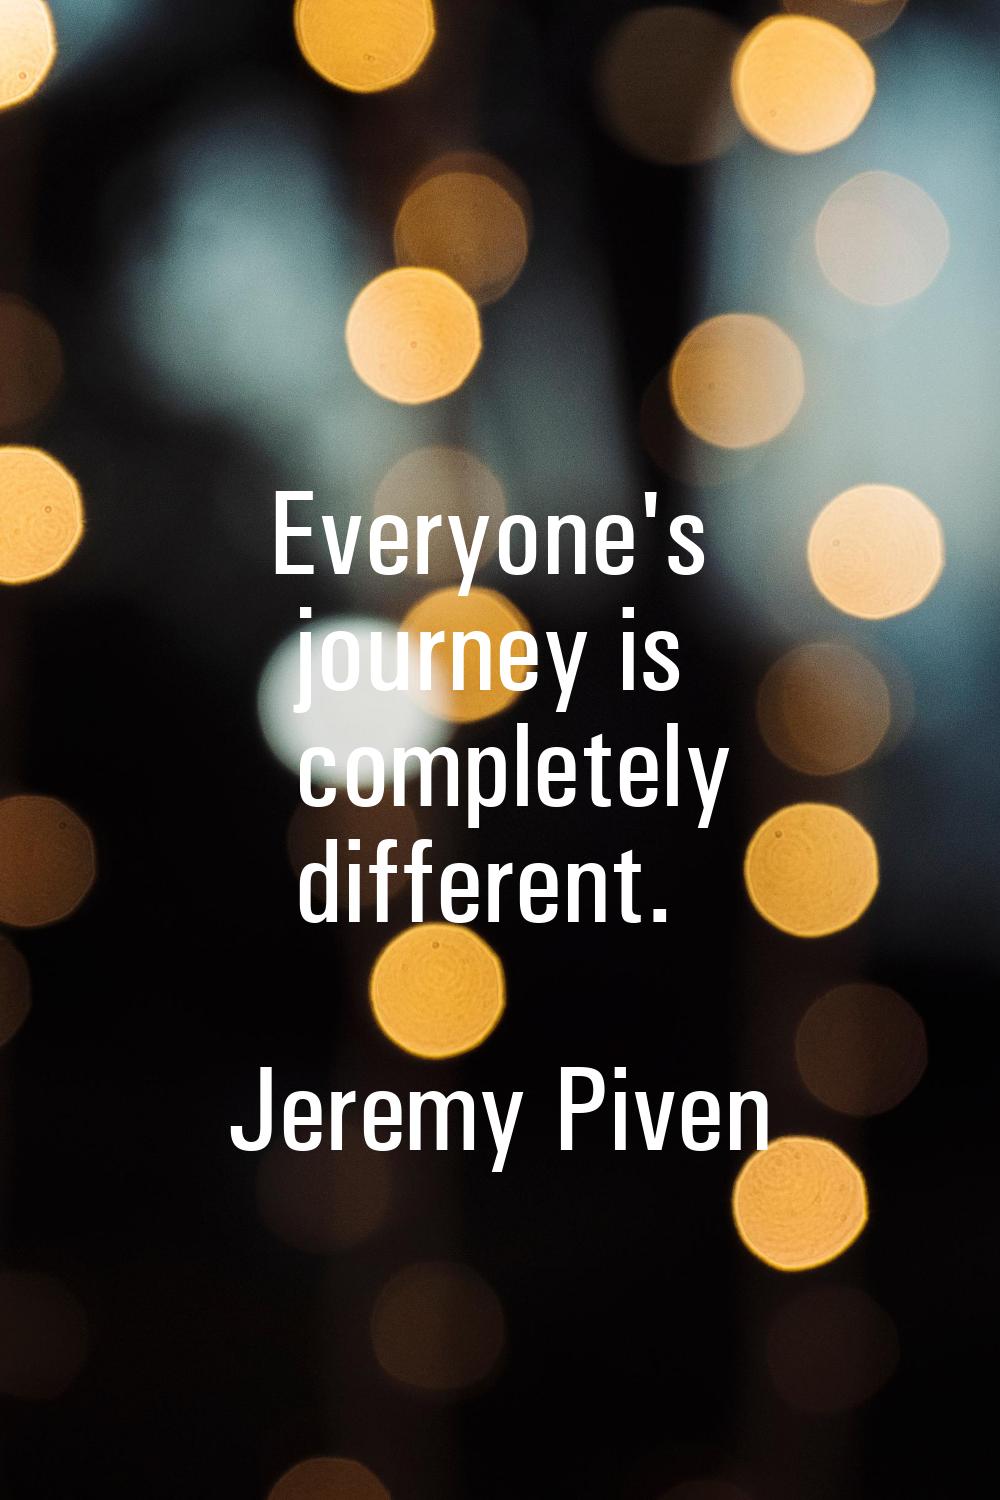 Everyone's journey is completely different.